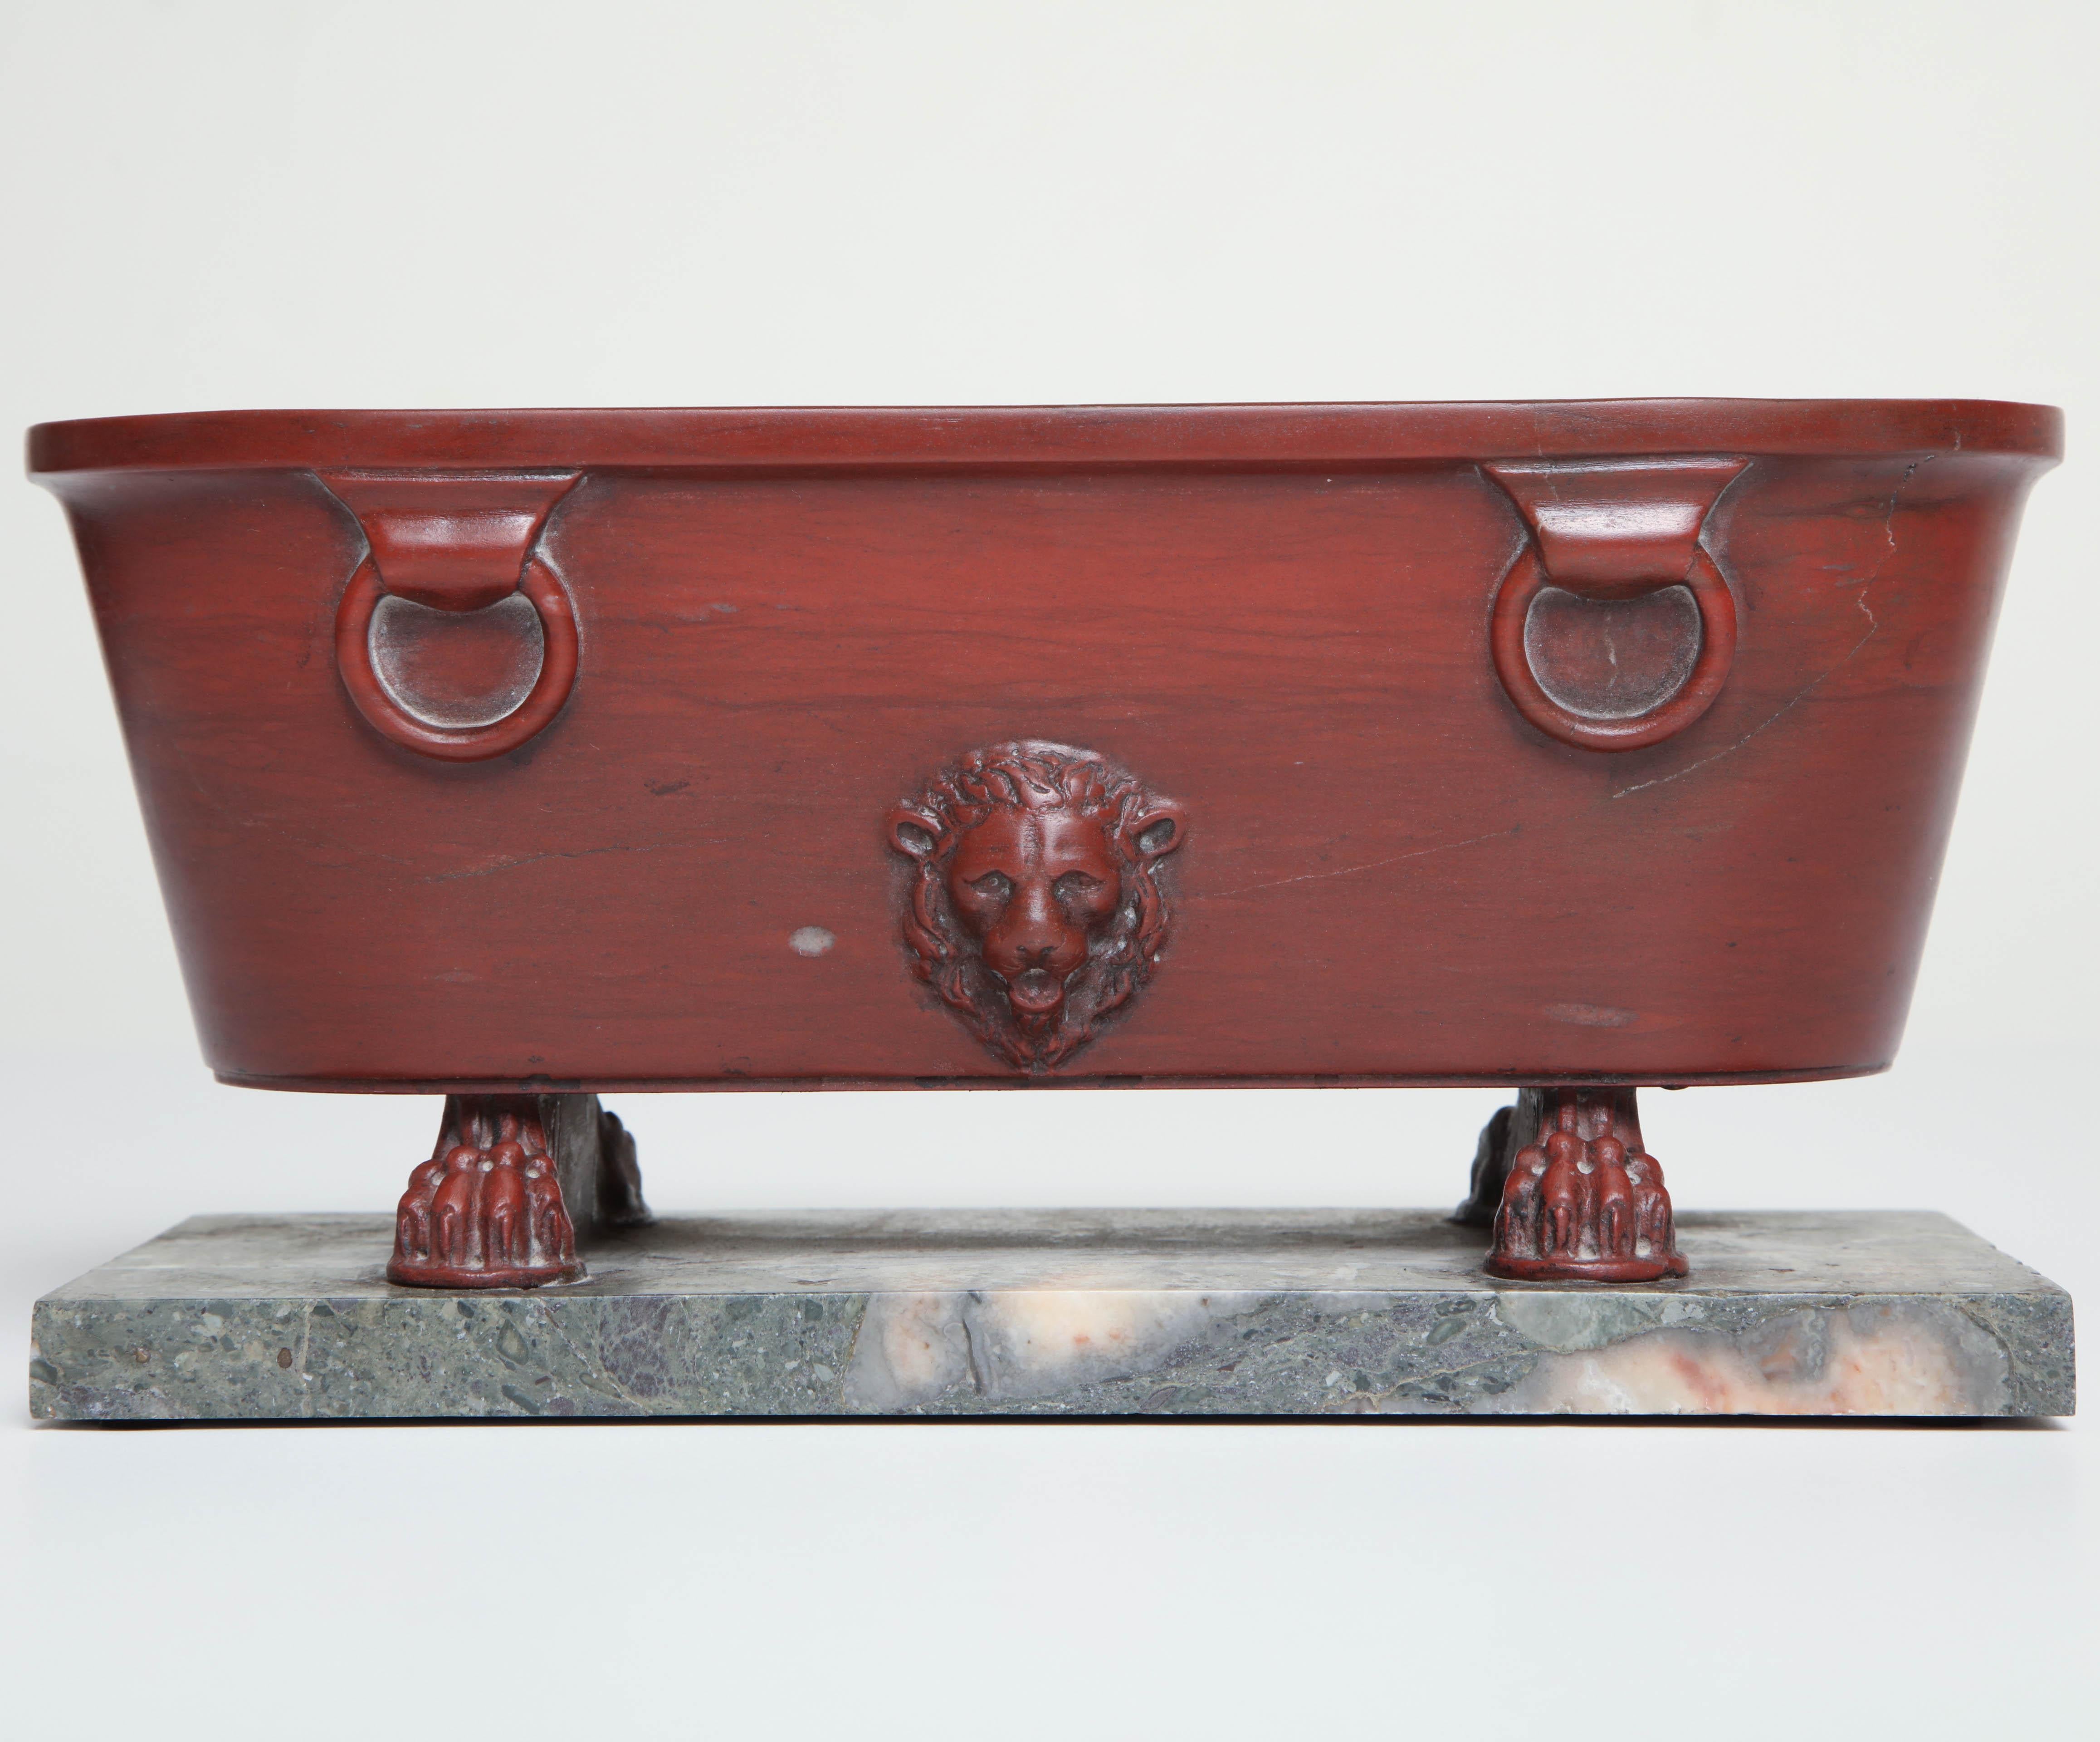 Early 19th century Italian, Grand Tour, Rosso Antico bath on an Africano marble base.